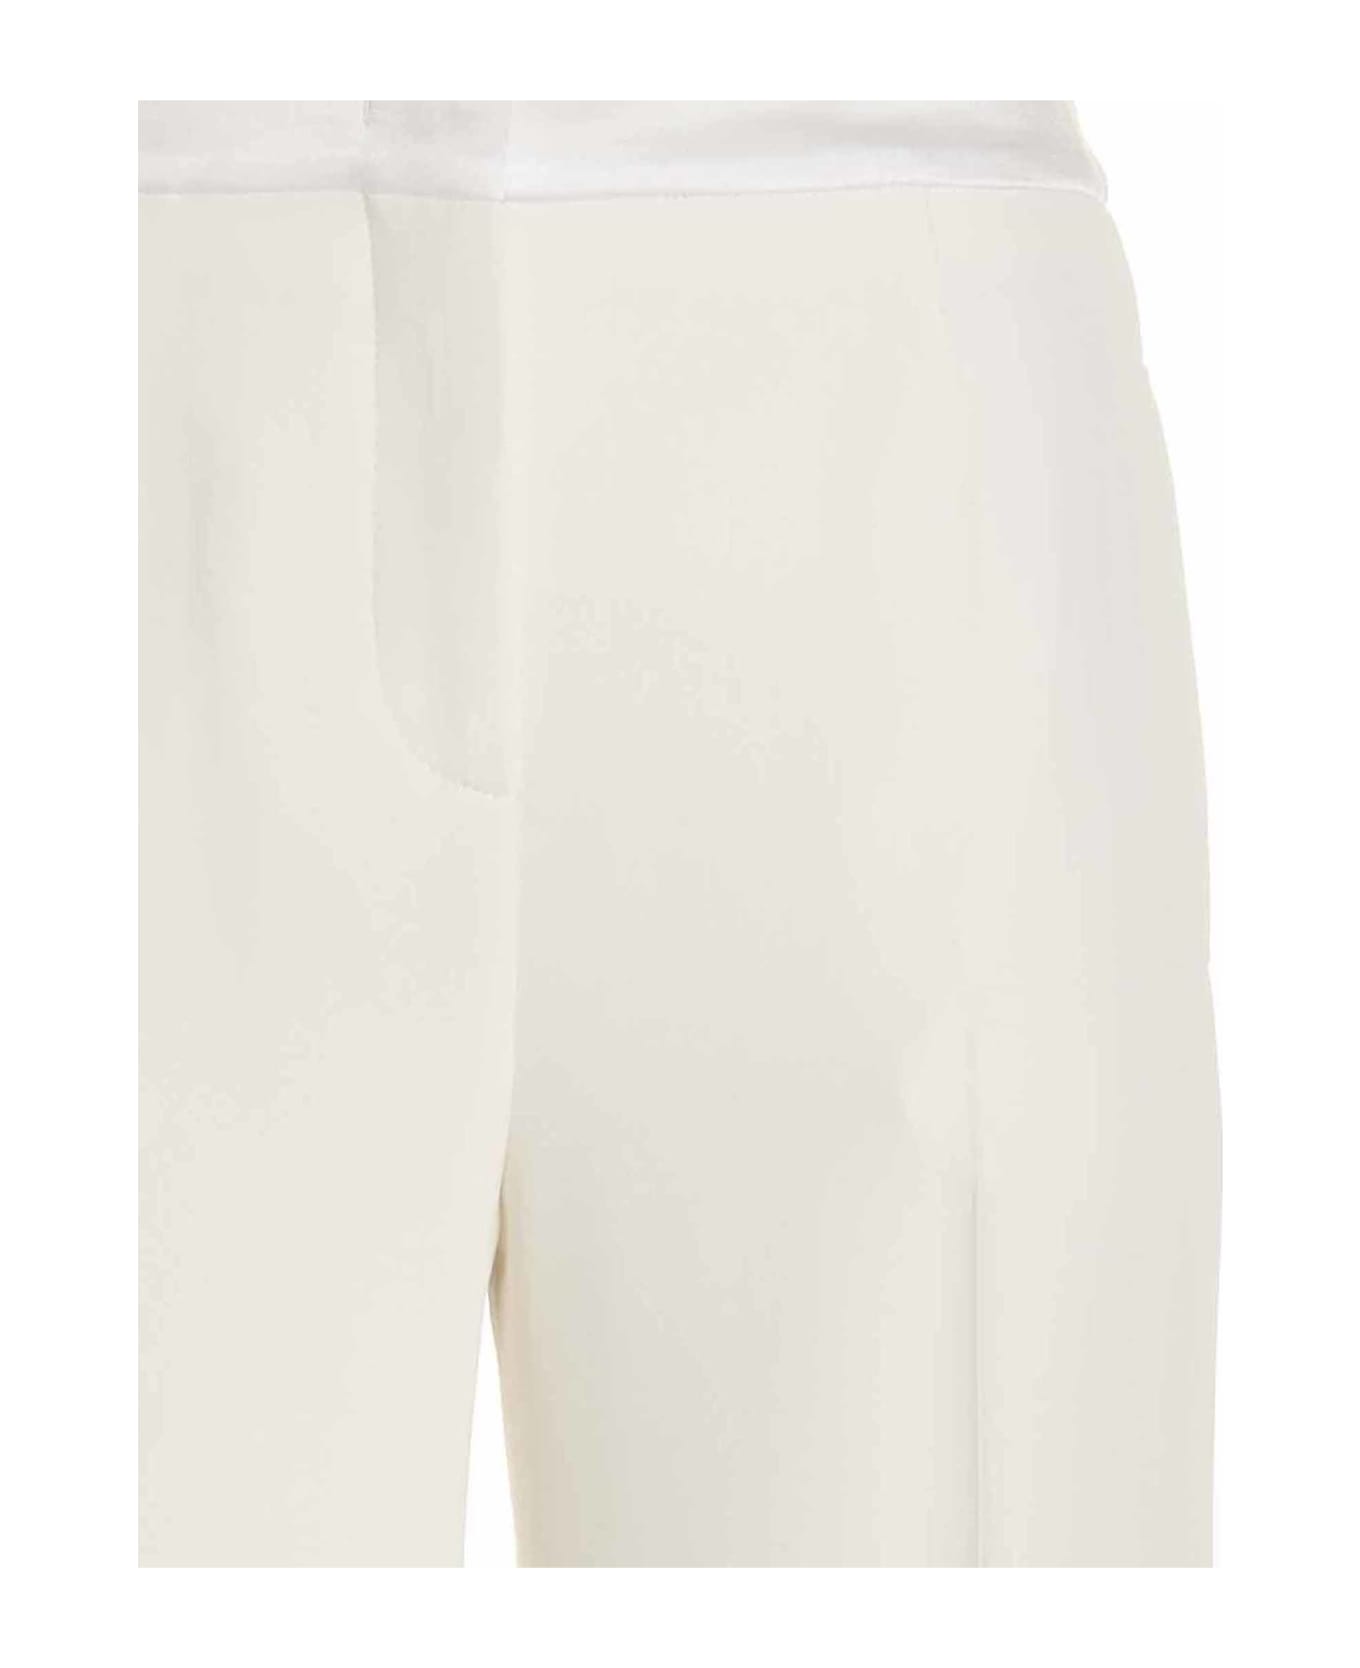 Ermanno Scervino Carrot Fit Pants - White ボトムス